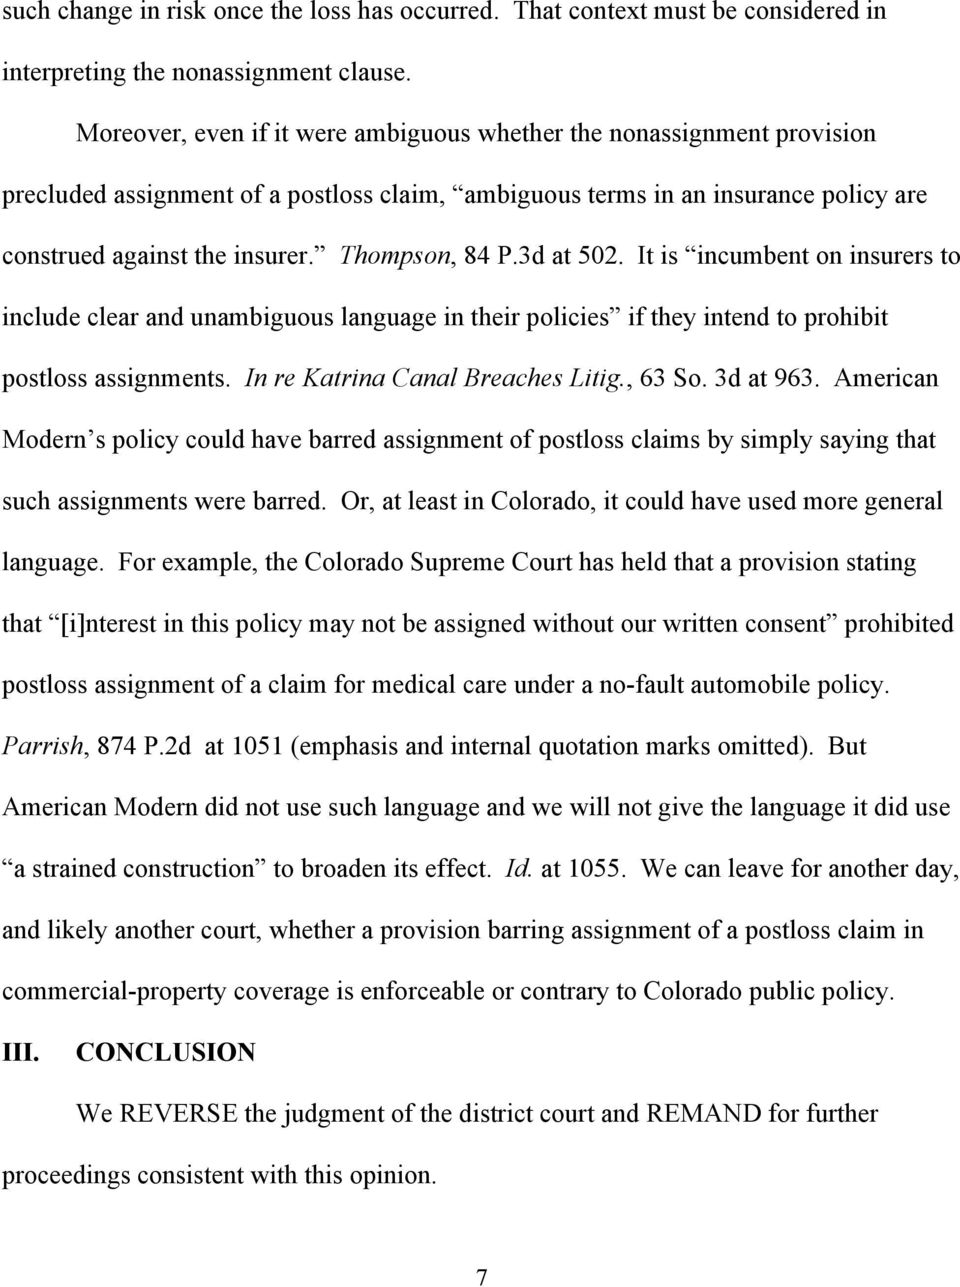 Thompson, 84 P.3d at 502. It is incumbent on insurers to include clear and unambiguous language in their policies if they intend to prohibit postloss assignments. In re Katrina Canal Breaches Litig.